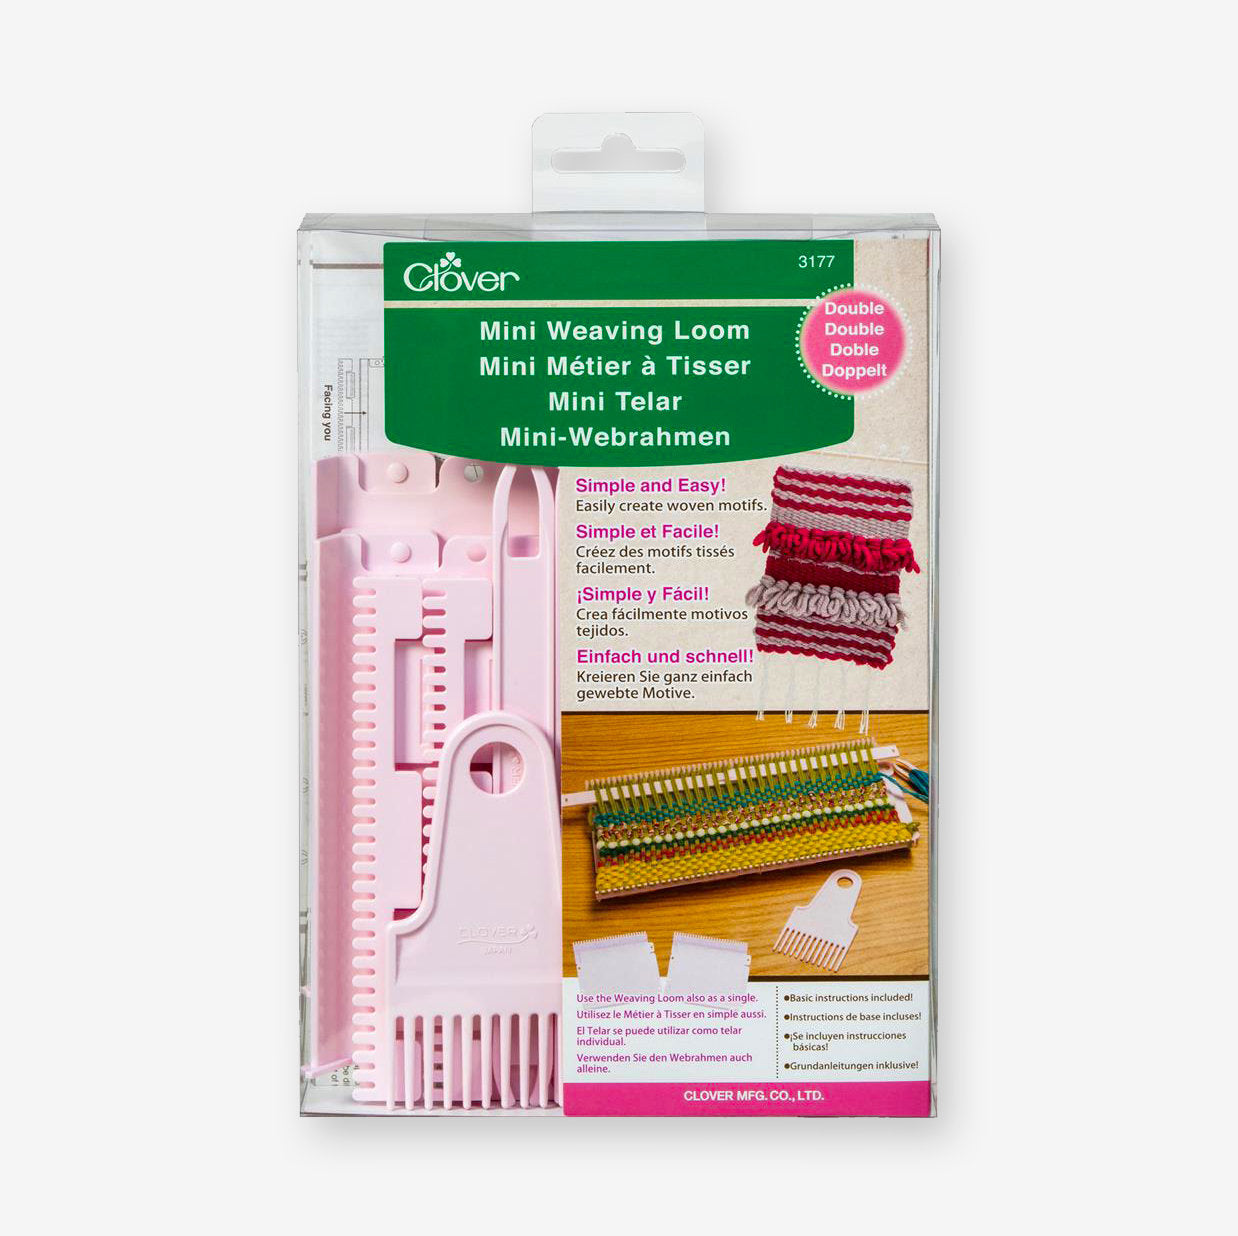 Clover 3177 Mini Double Loom for Custom Weaving - Includes Instructions and Tools